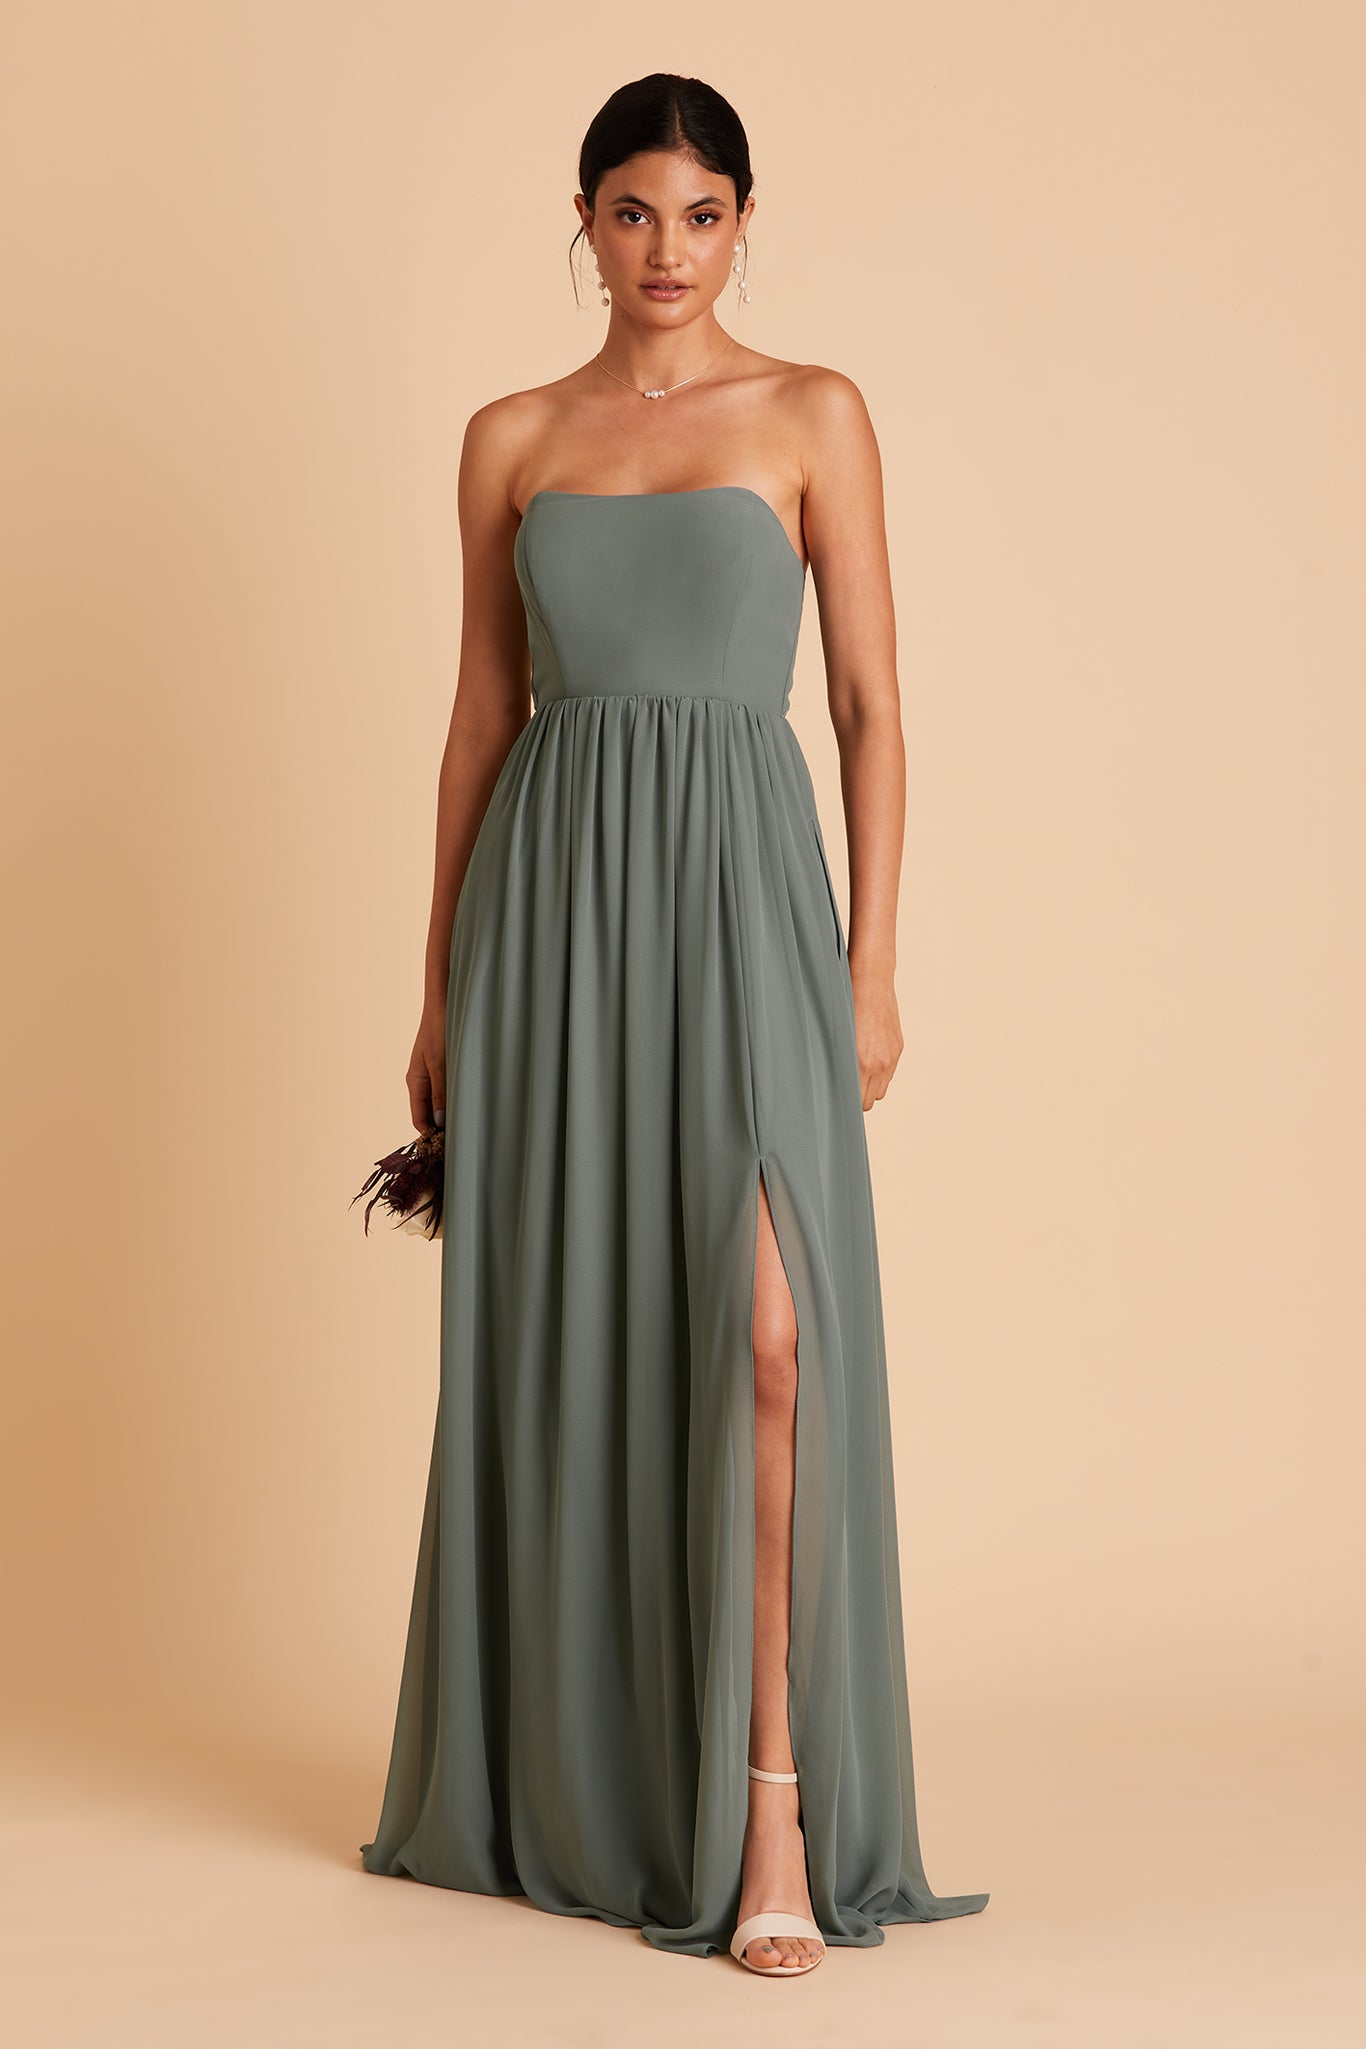 August bridesmaid dress with slit in sea glass chiffon by Birdy Grey, front view